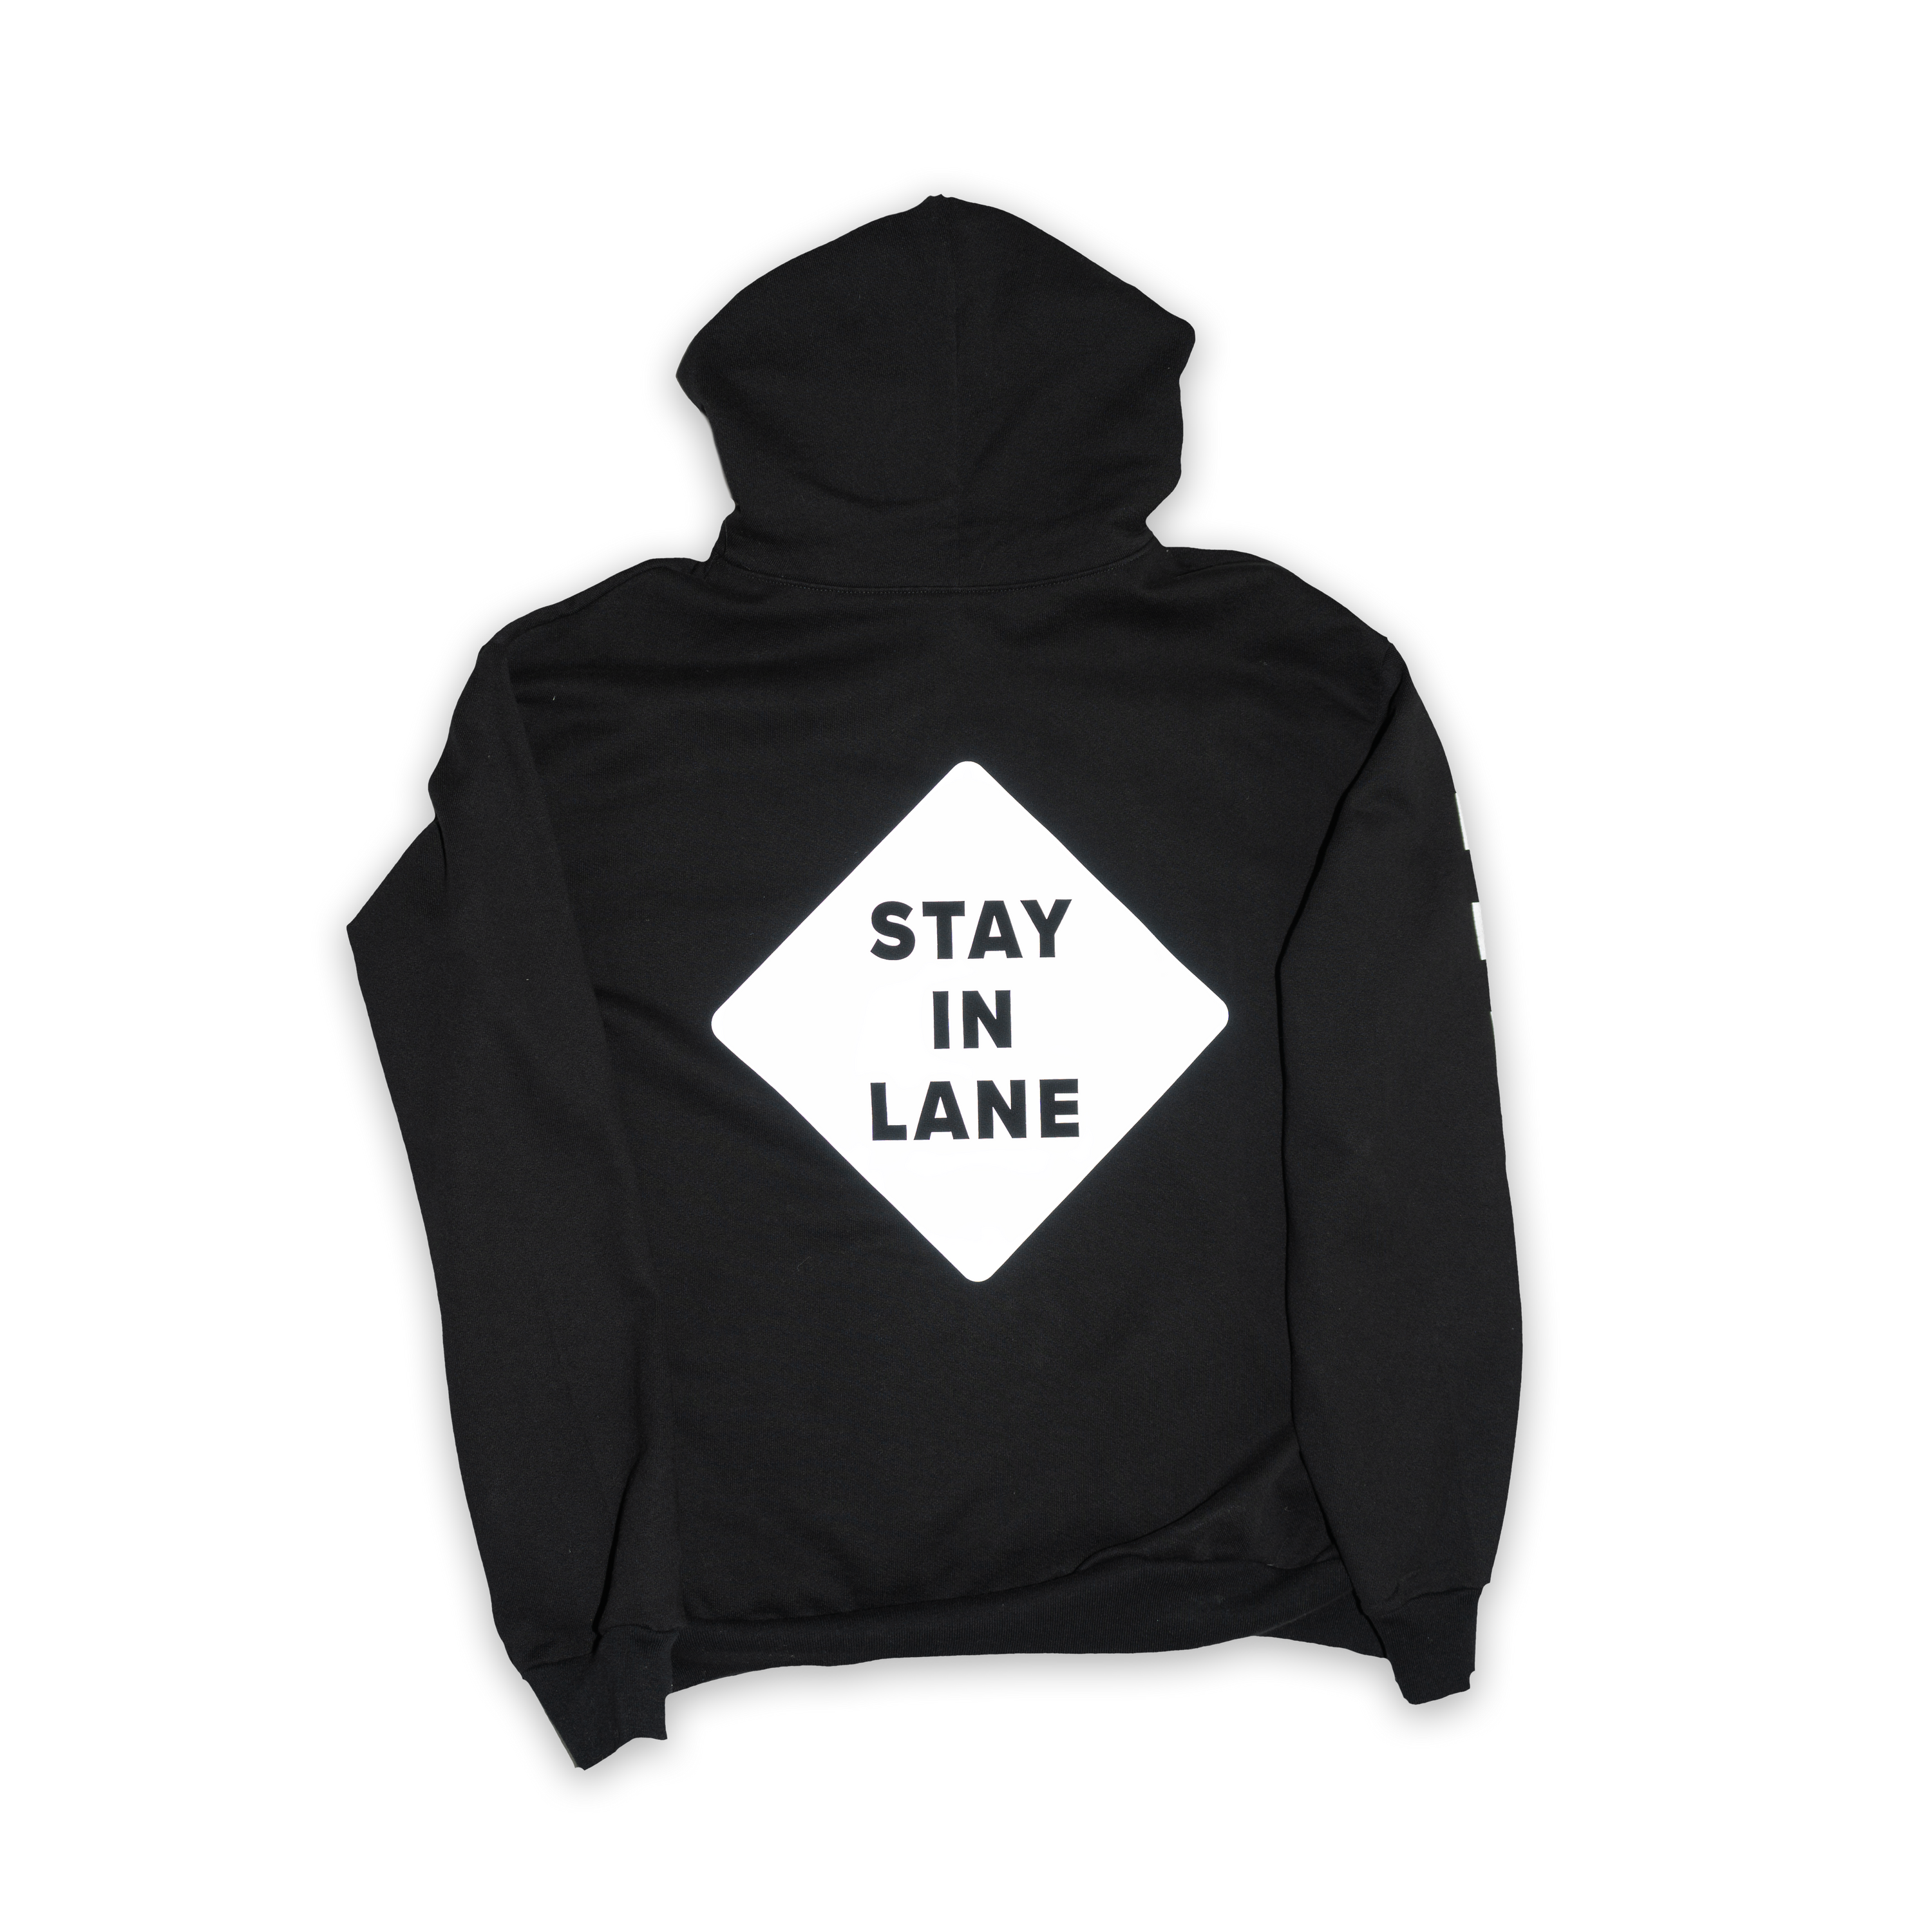 "Stay in Lane" Reflective Black Hoodie